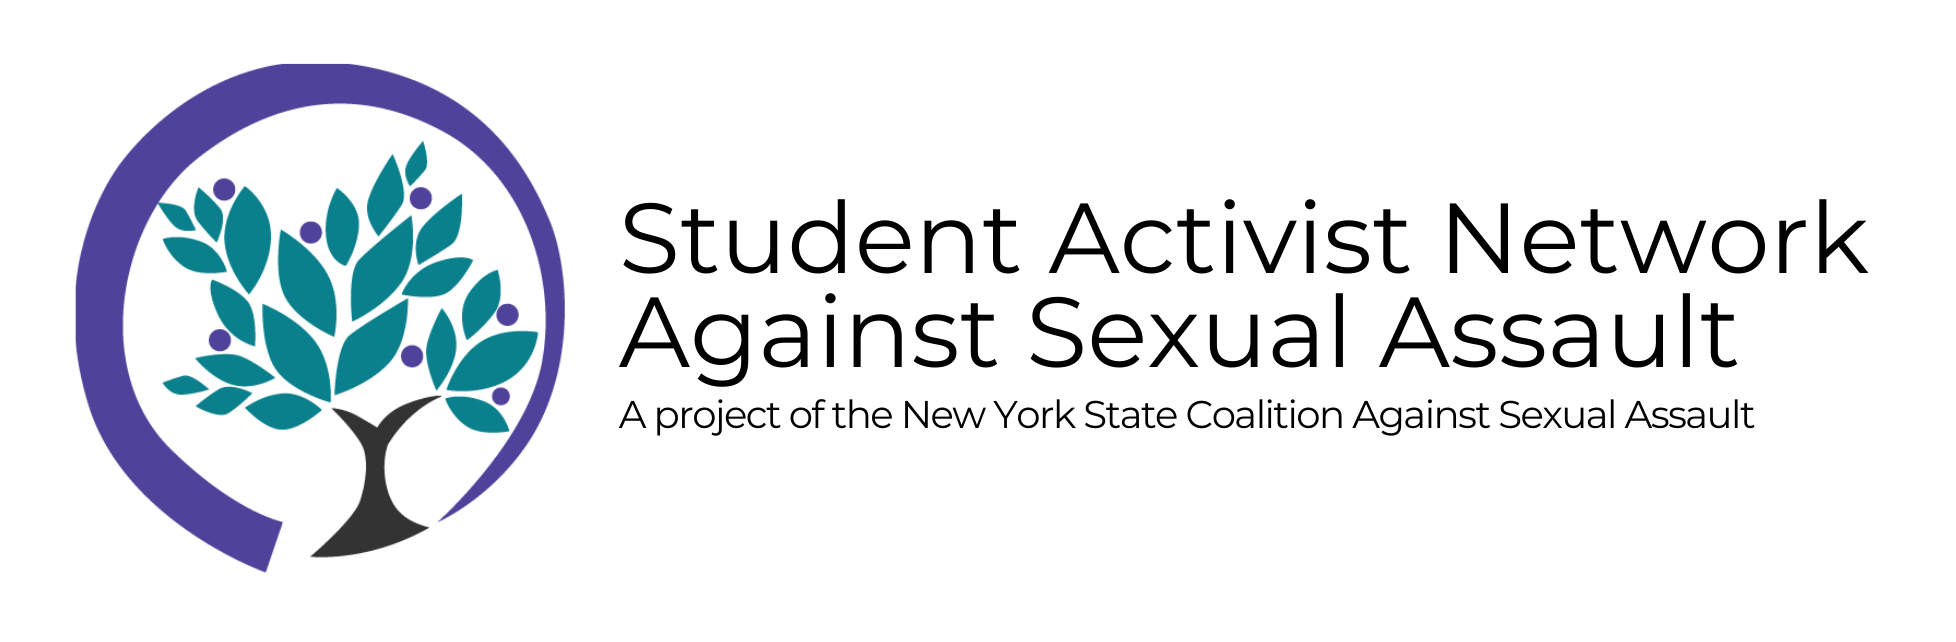 Student Activist Network Against Sexual Assault: A project of the New York State Coalition Against Sexual Assault. Includes NYSCASA's tree logo: black tree trunk with teal leaves, surrounded by a purple circle